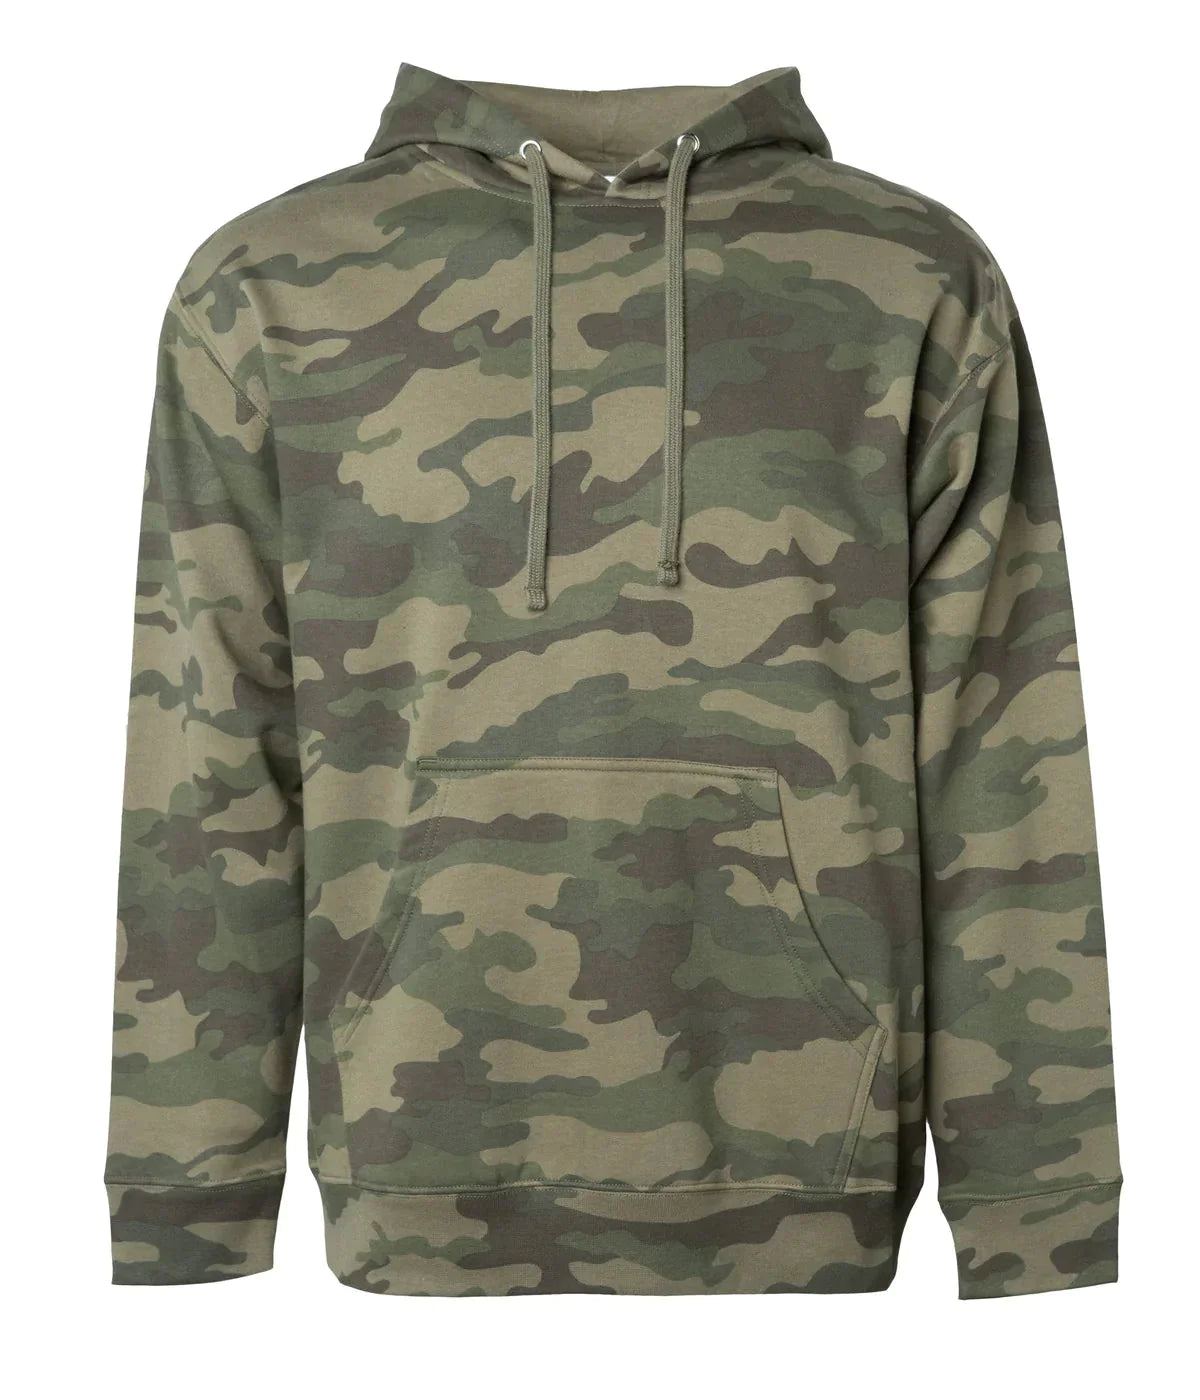 SS4500 Midweight Hooded Pullover Sweatshirt - Forest Camo